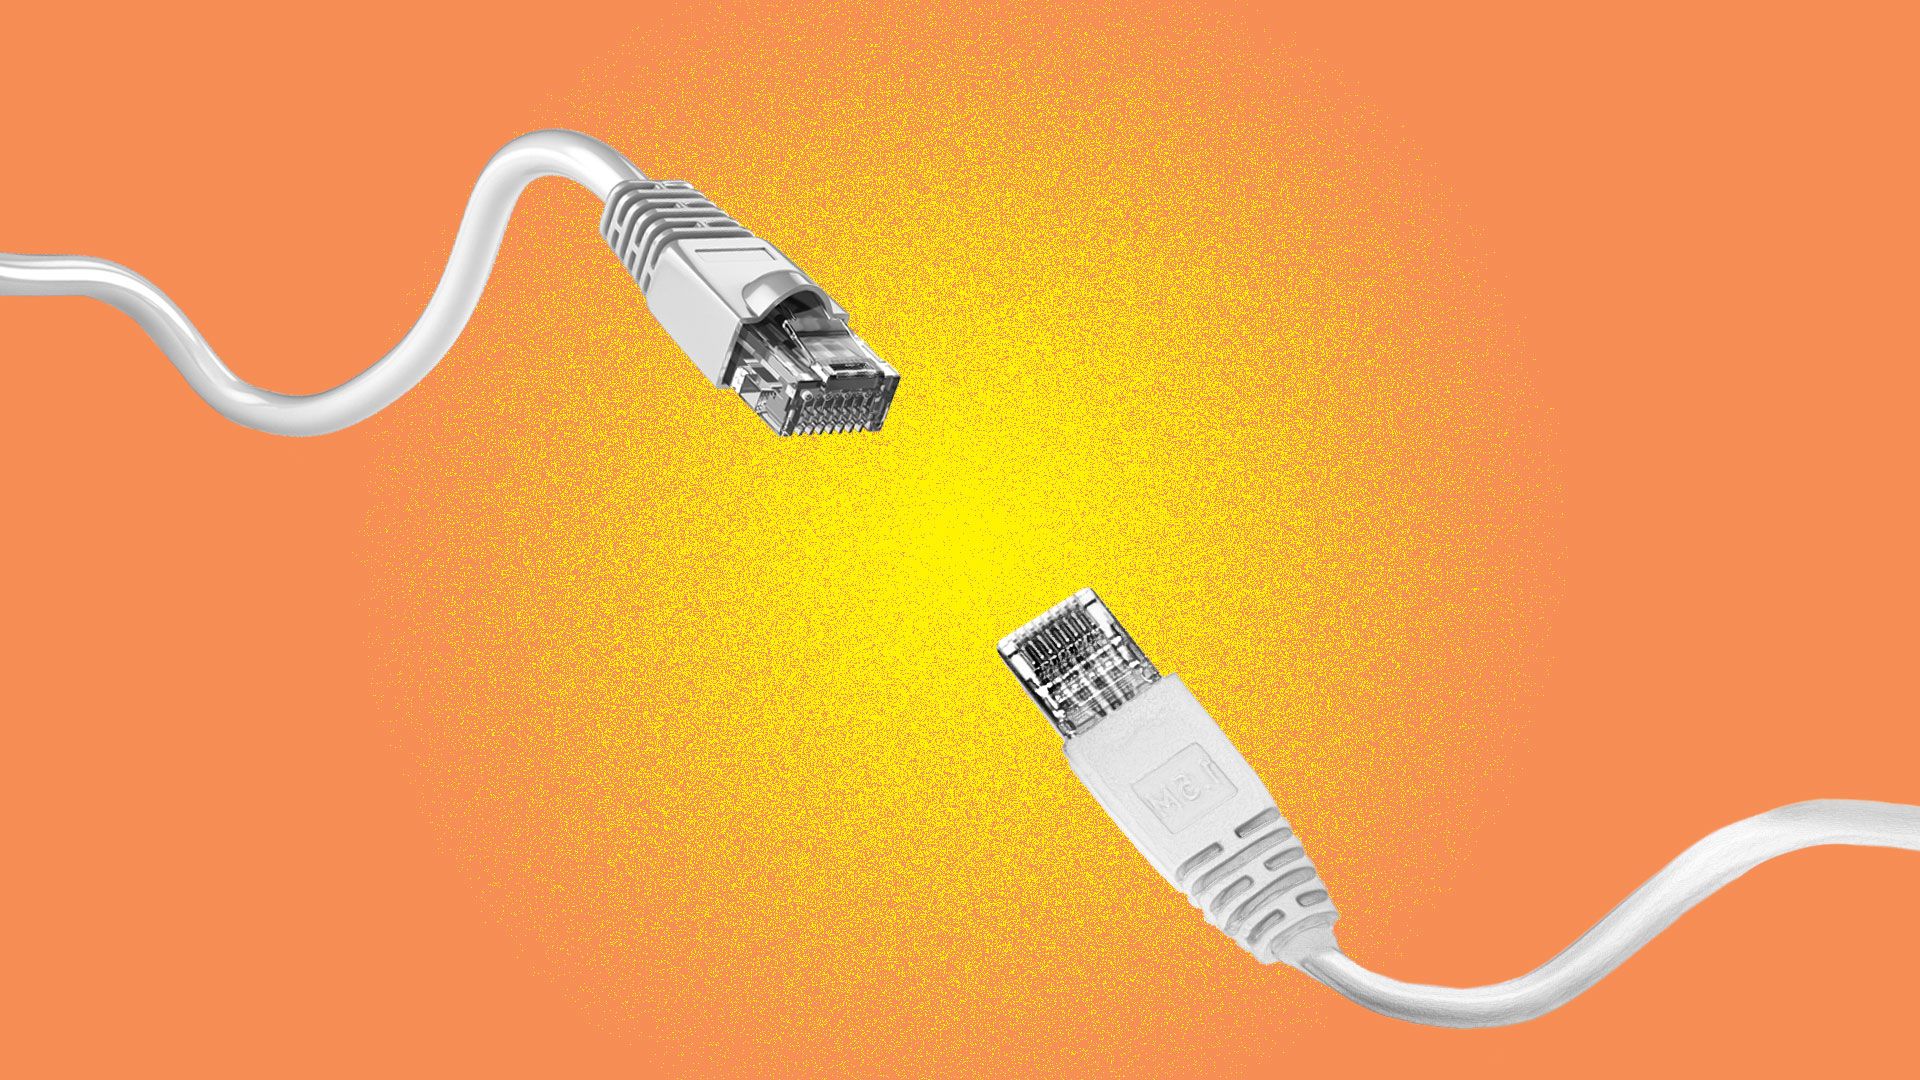 Illustration of two Ethernet cables poised for a fight.